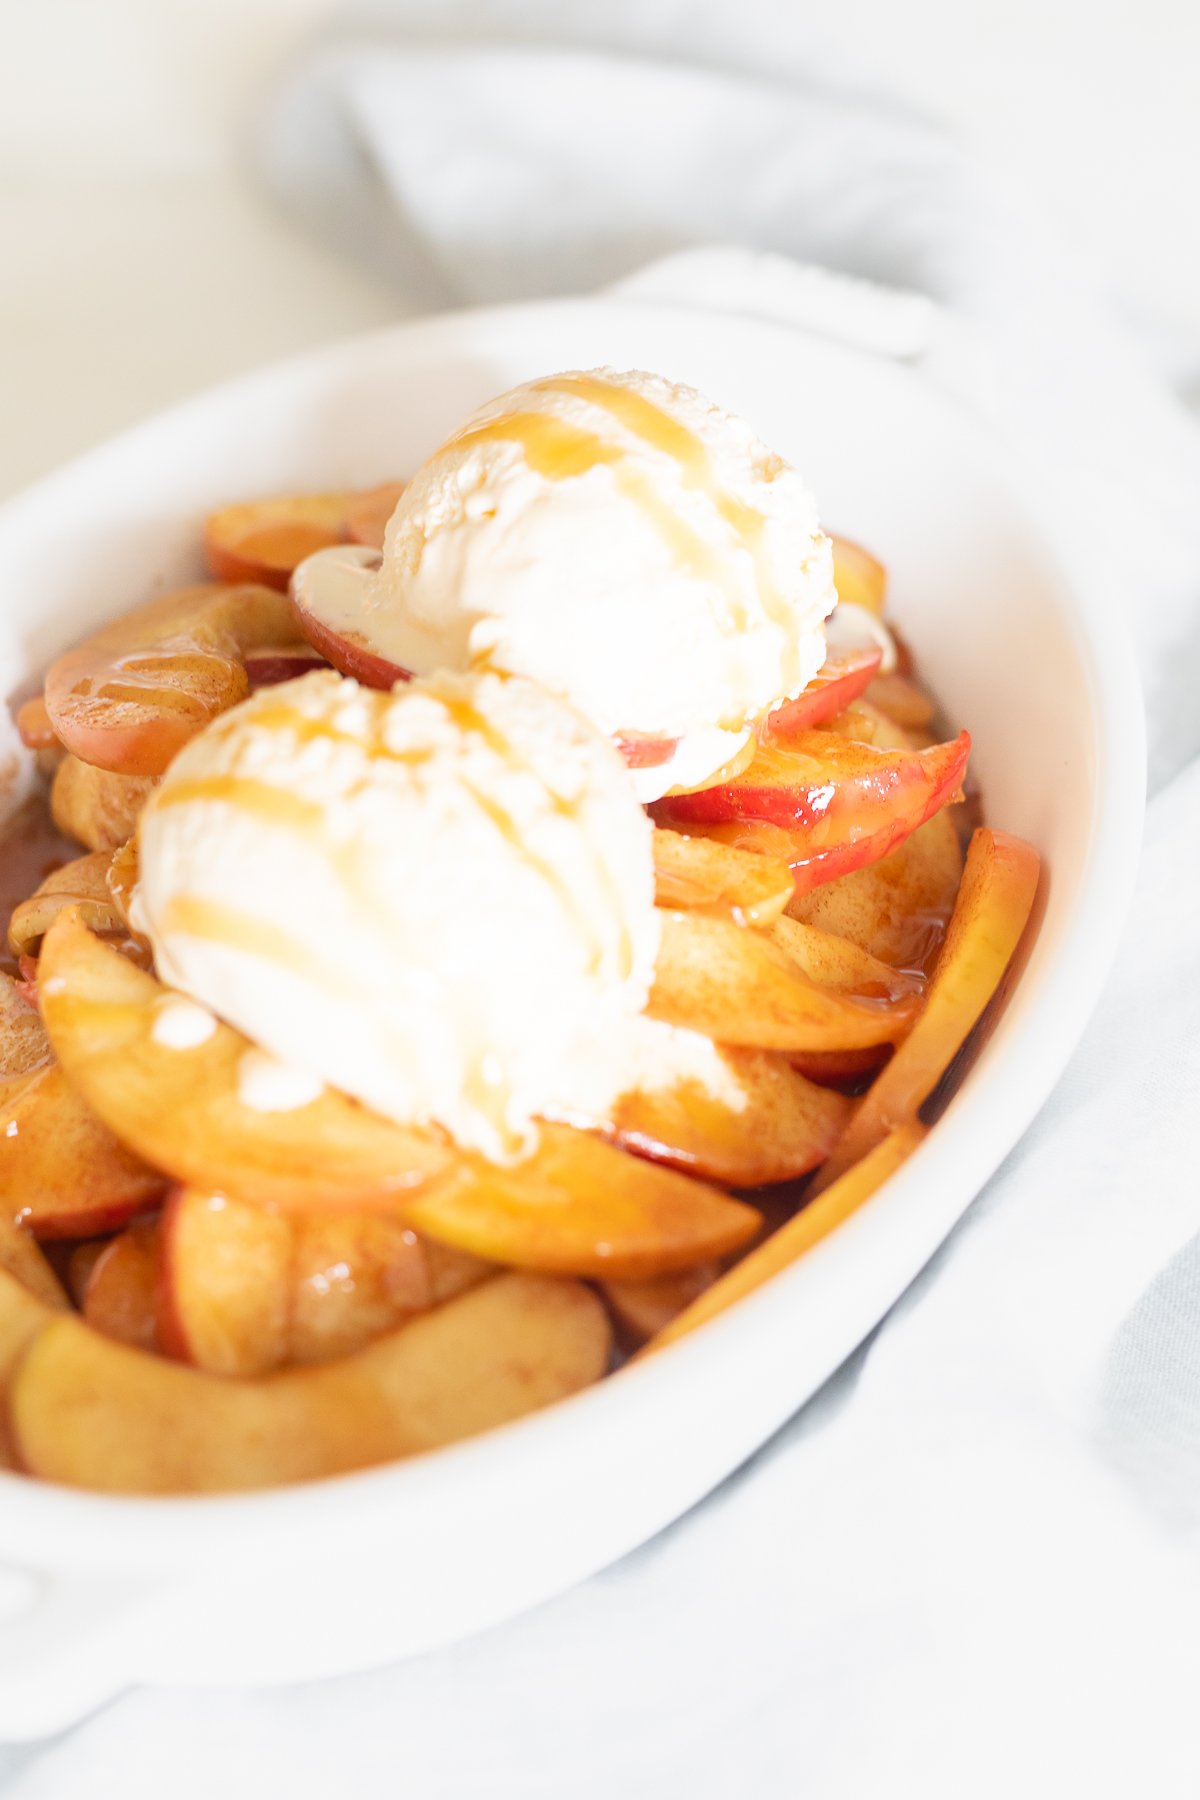 A white dish filled with baked apple slices and ice cream.